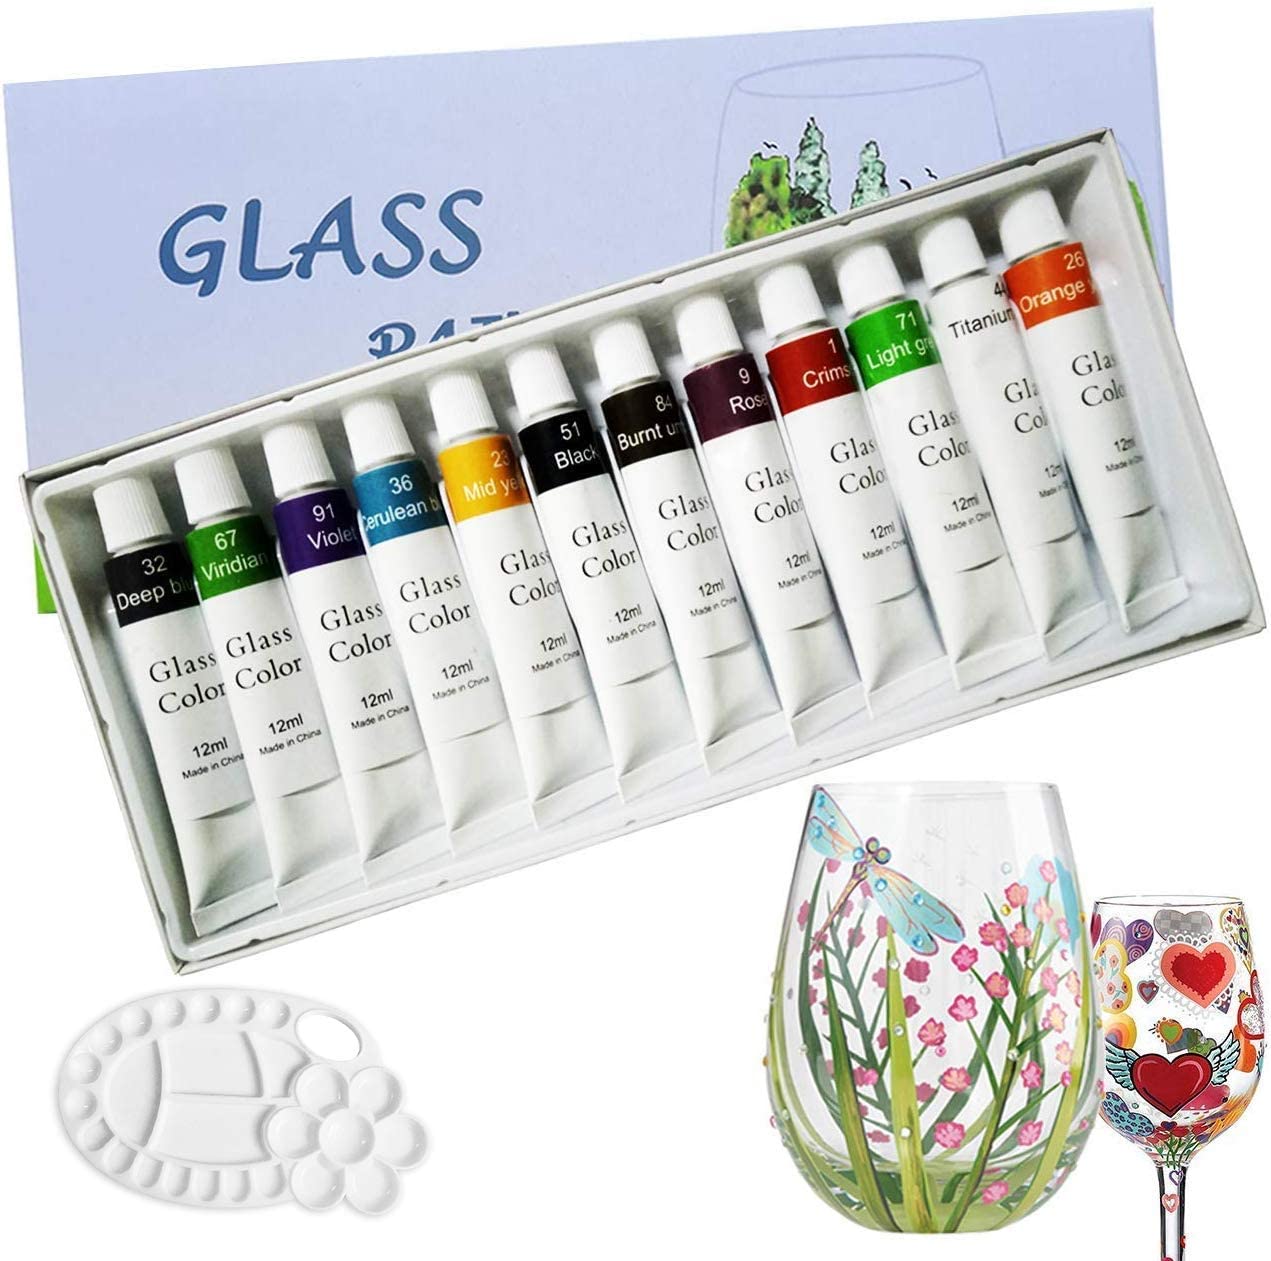 Glass painting kits – 5. Glass painting supplies, Magicdo 12 Colors Glass Paint With Palette, Amazon